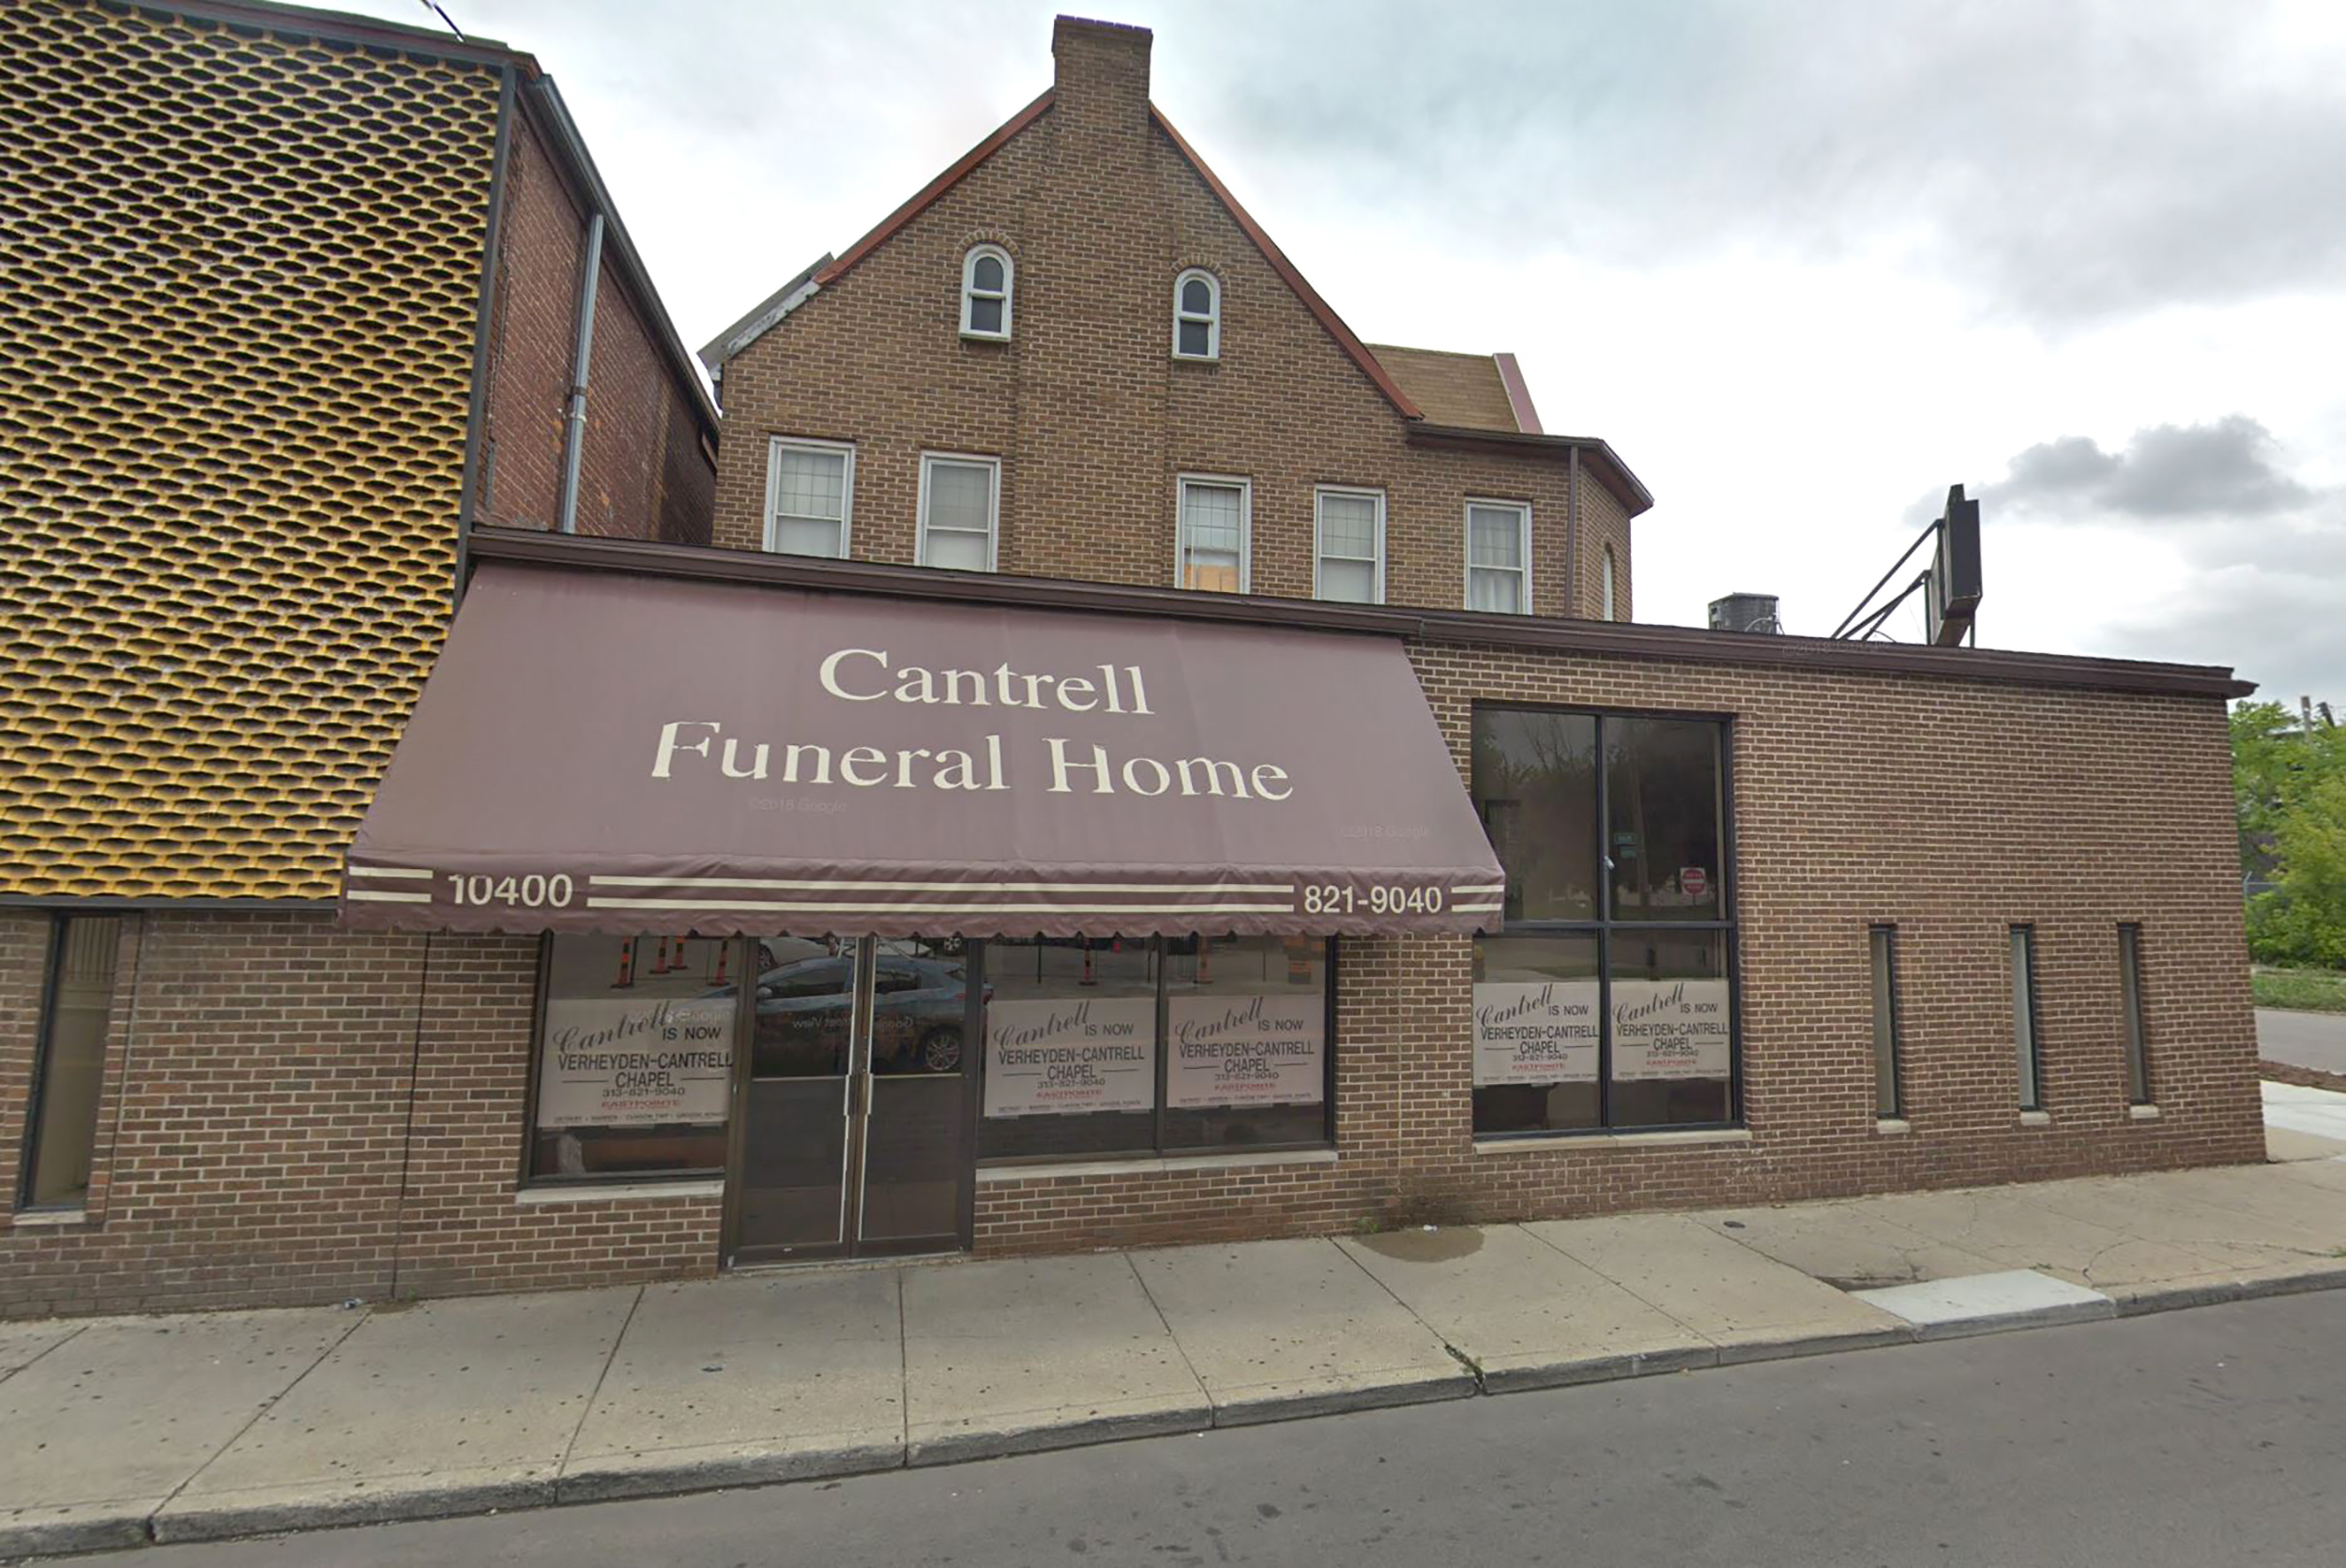 Decomposed Bodies of 11 Infants Found in Ceiling of Closed Funeral Home